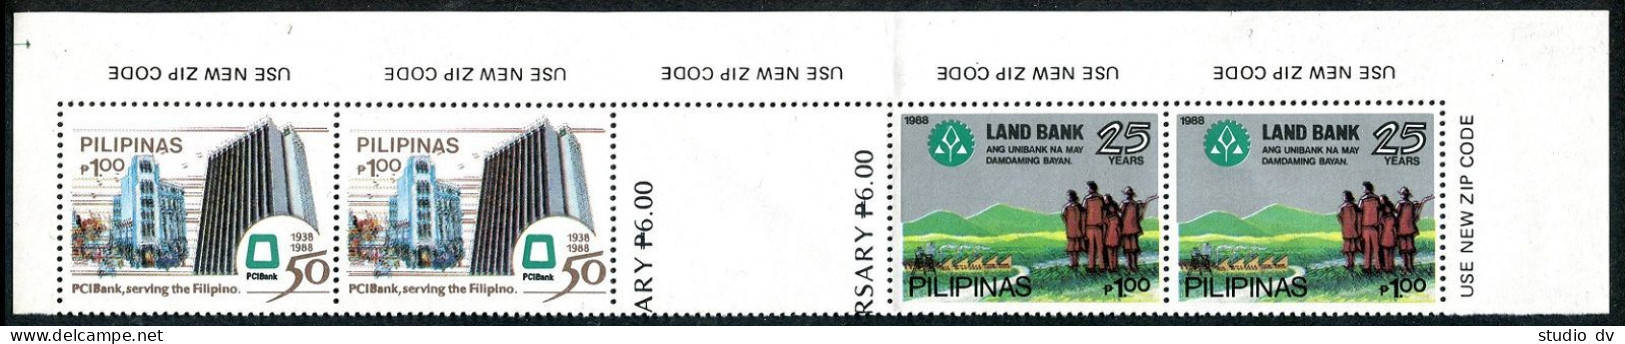 Philippines 1943-1944 Strip/2 Pairs, MNH. Mi 1872-1873. Land, Commercial  Banks. - Philippines